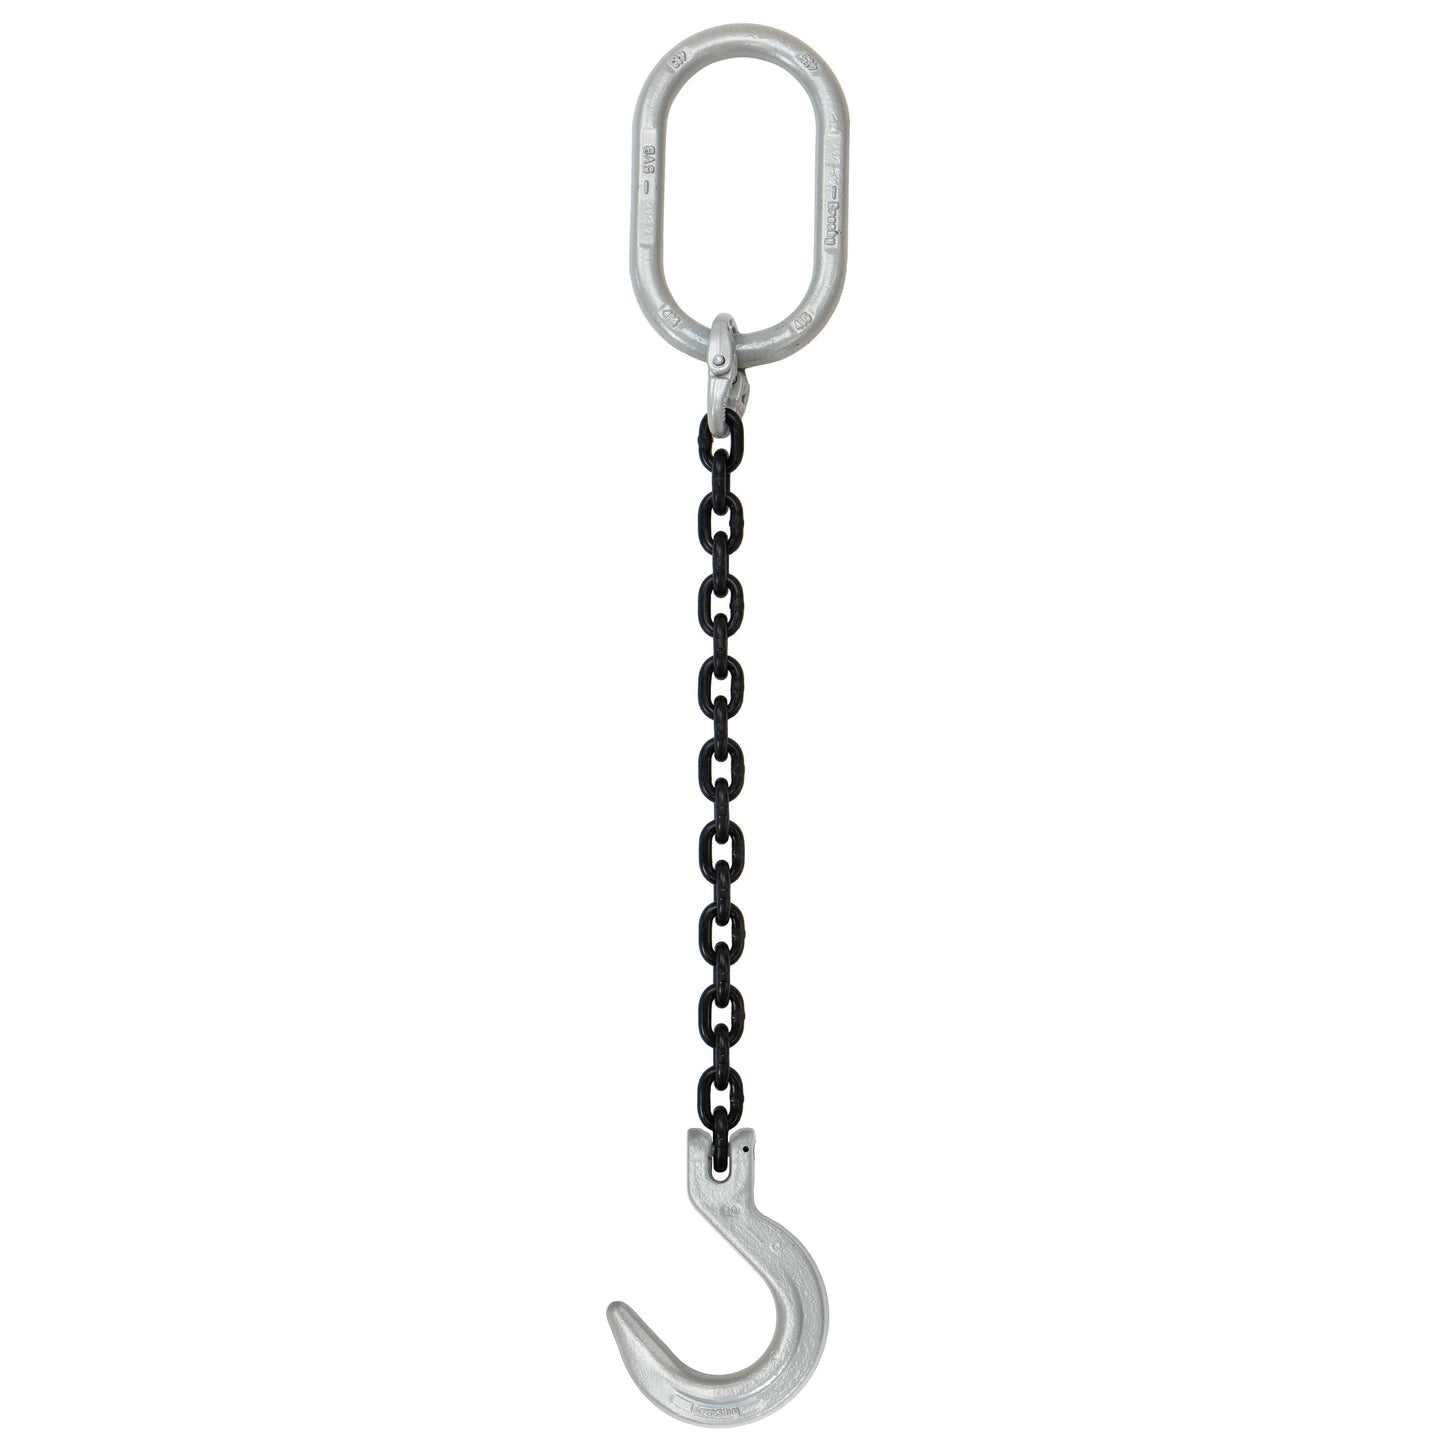 38 inch x 4 foot Domestic Single Leg Chain Sling w Crosby Foundry Hook Grade 100 image 1 of 2